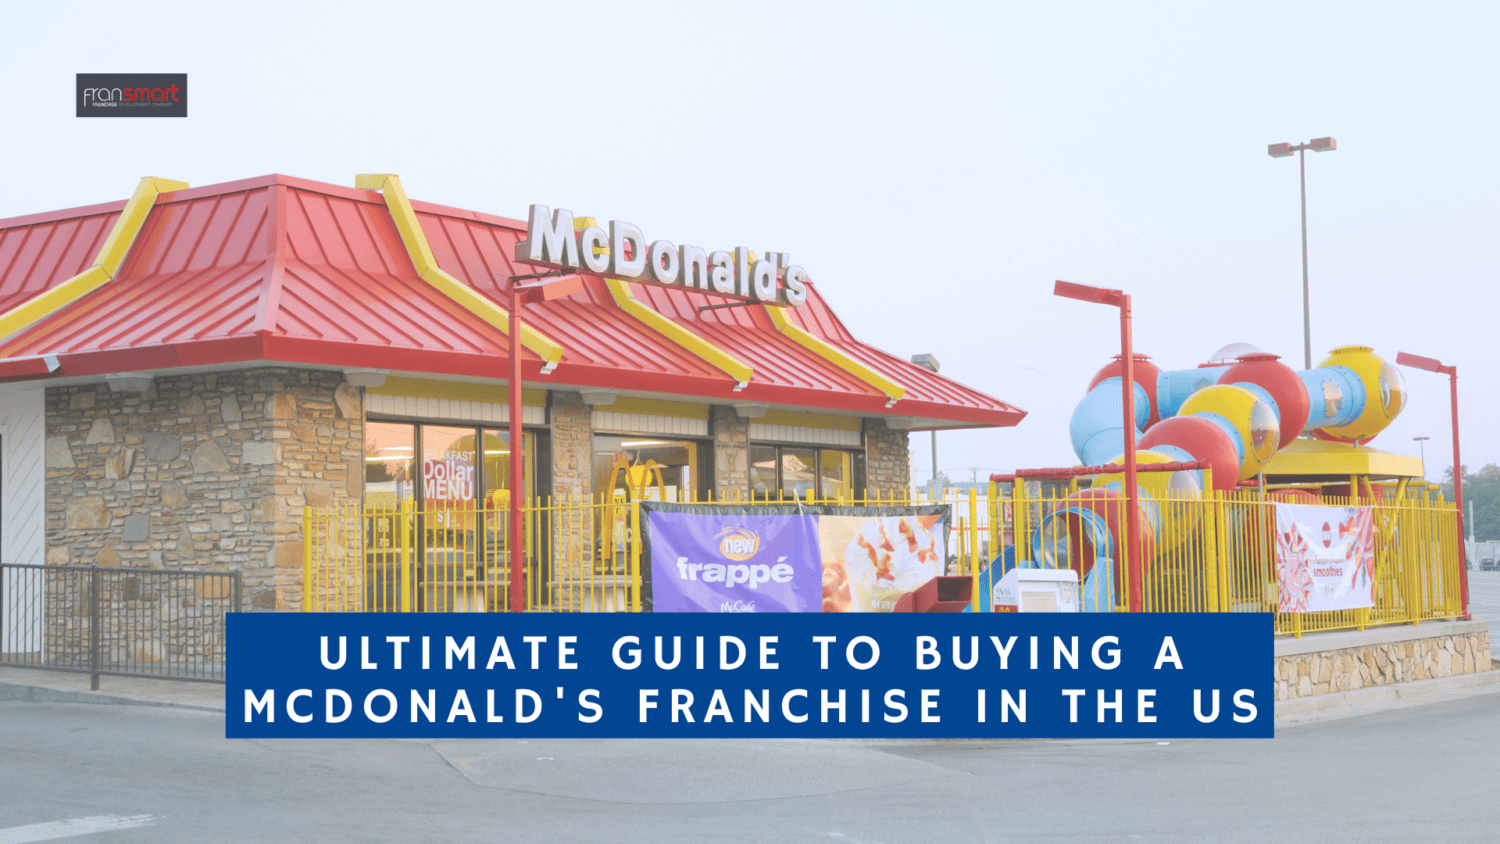 A McDonalds building with the wording Ultimate guide to buying a McDonalds franchise in the US above